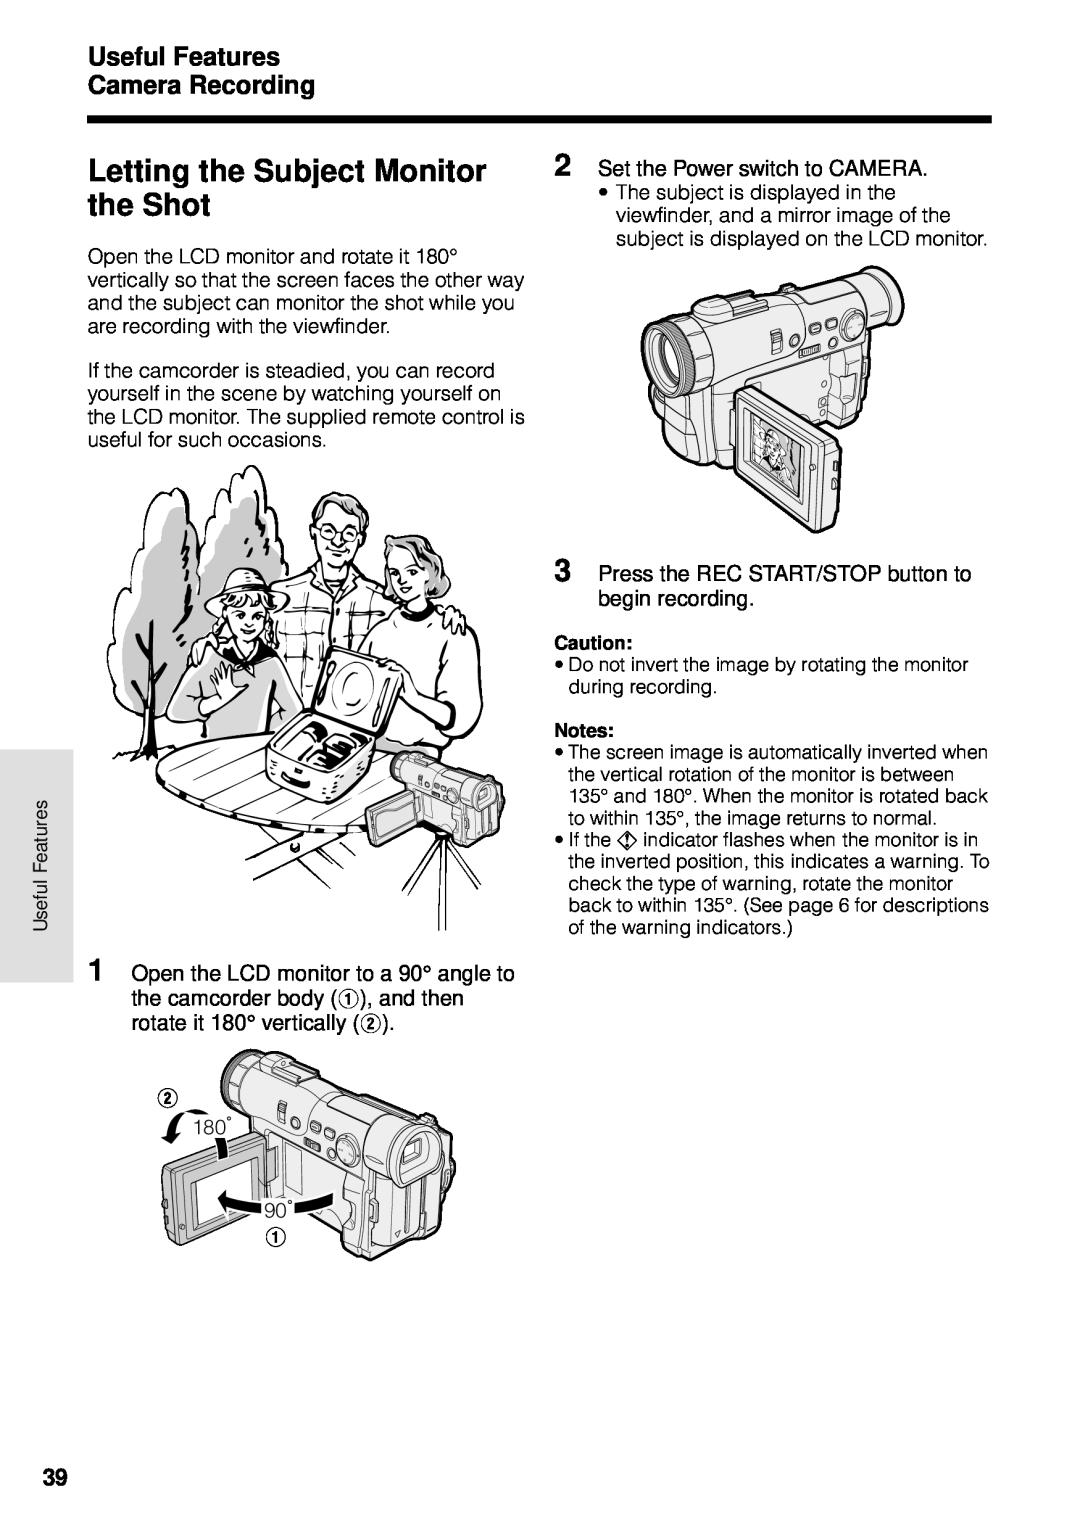 Sharp VL-WD250U operation manual Letting the Subject Monitor, the Shot, Useful Features Camera Recording 